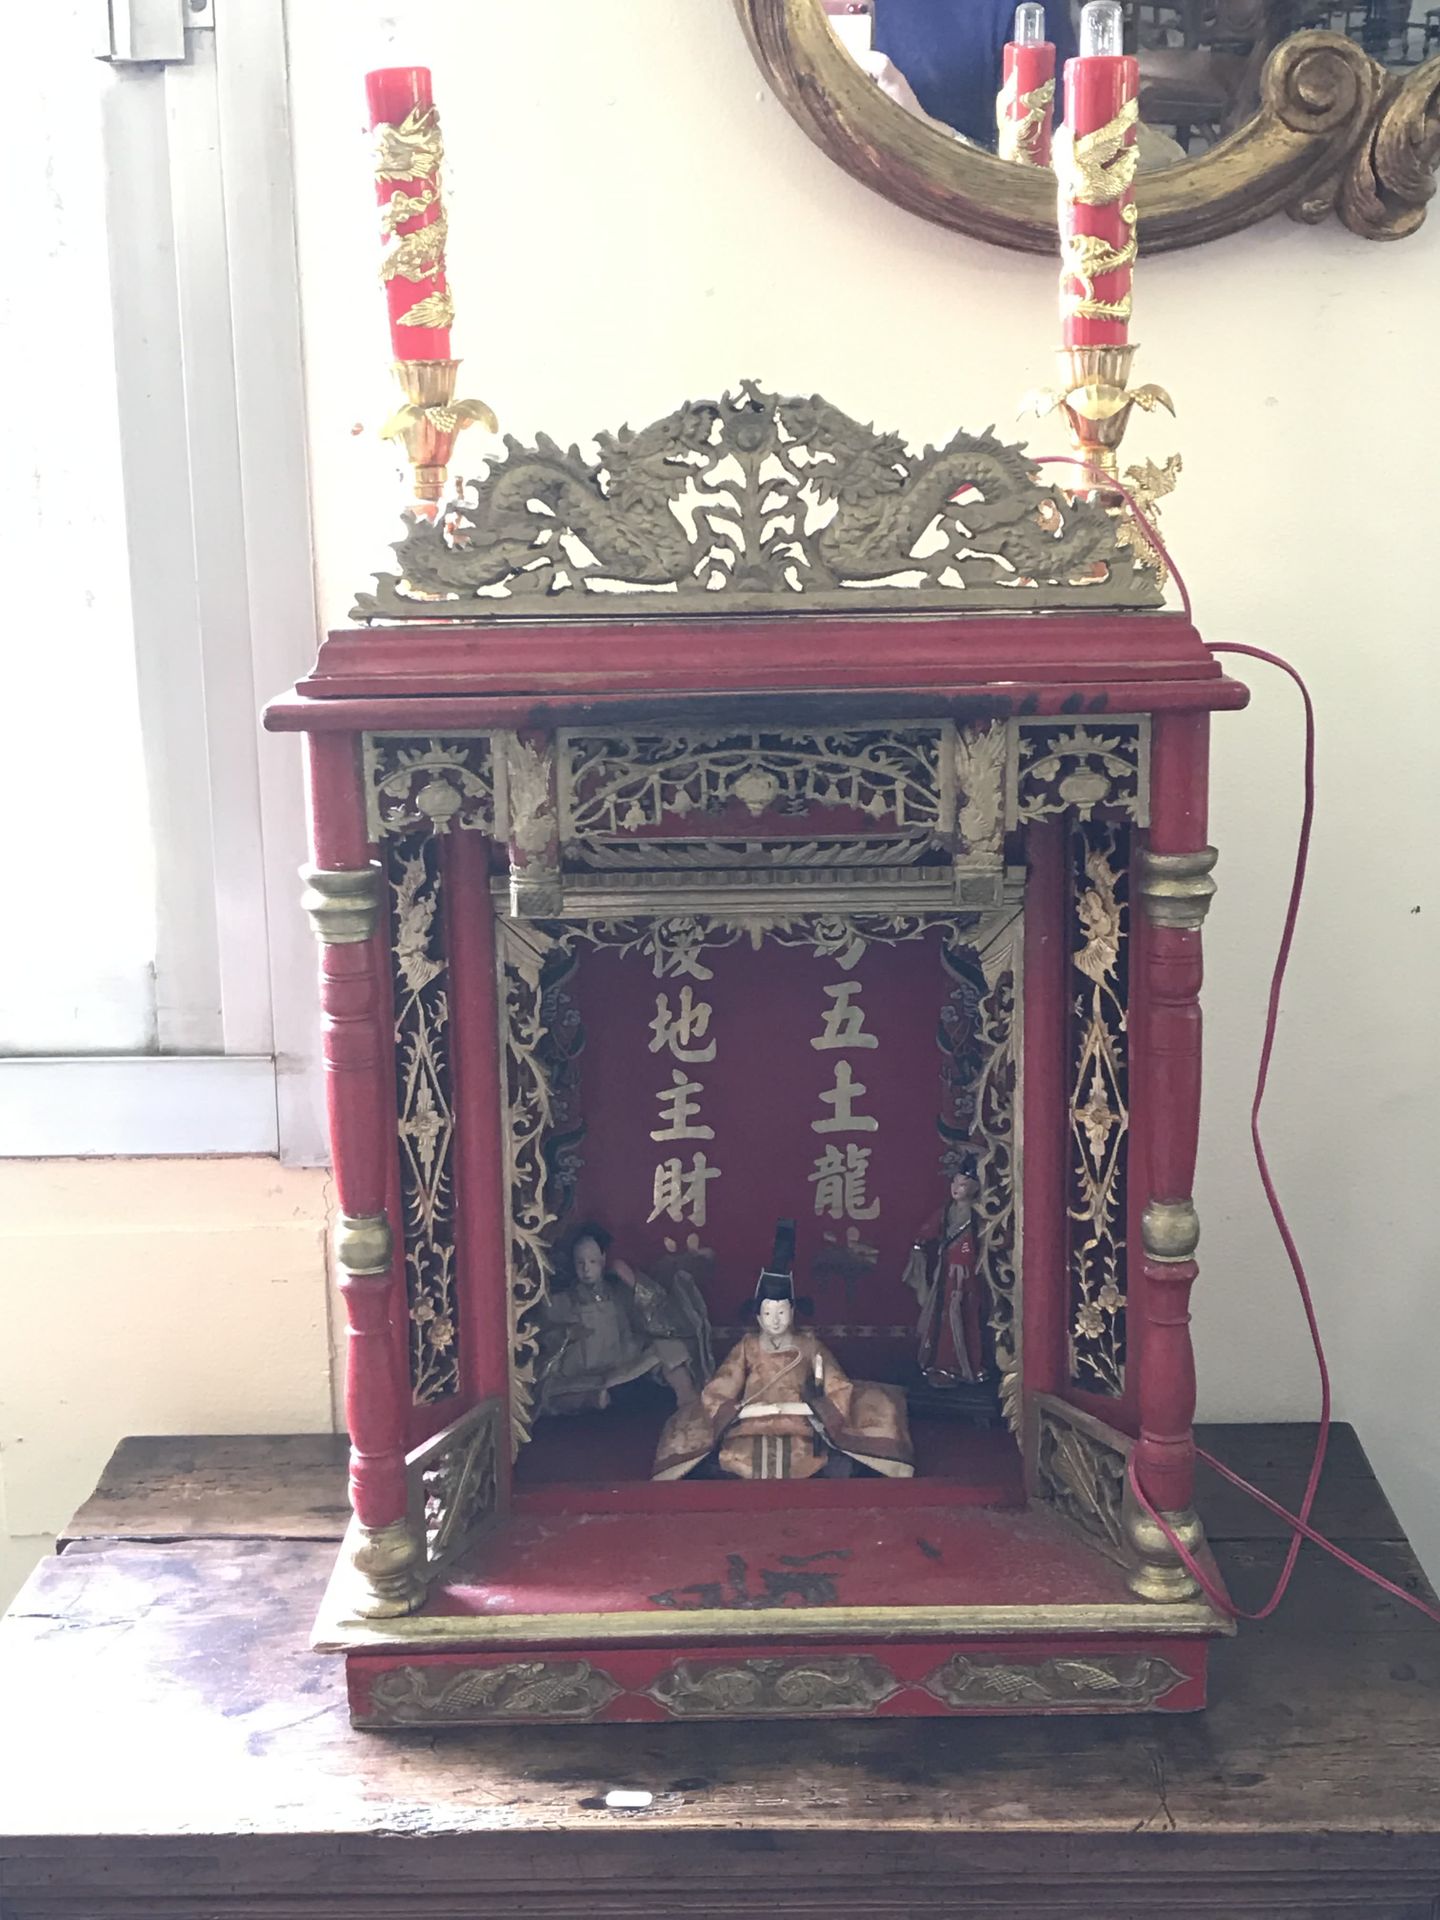 Null VIETNAMESE THEATRE

in lacquered wood with its characters

H. 57 W. 40 D. 3&hellip;